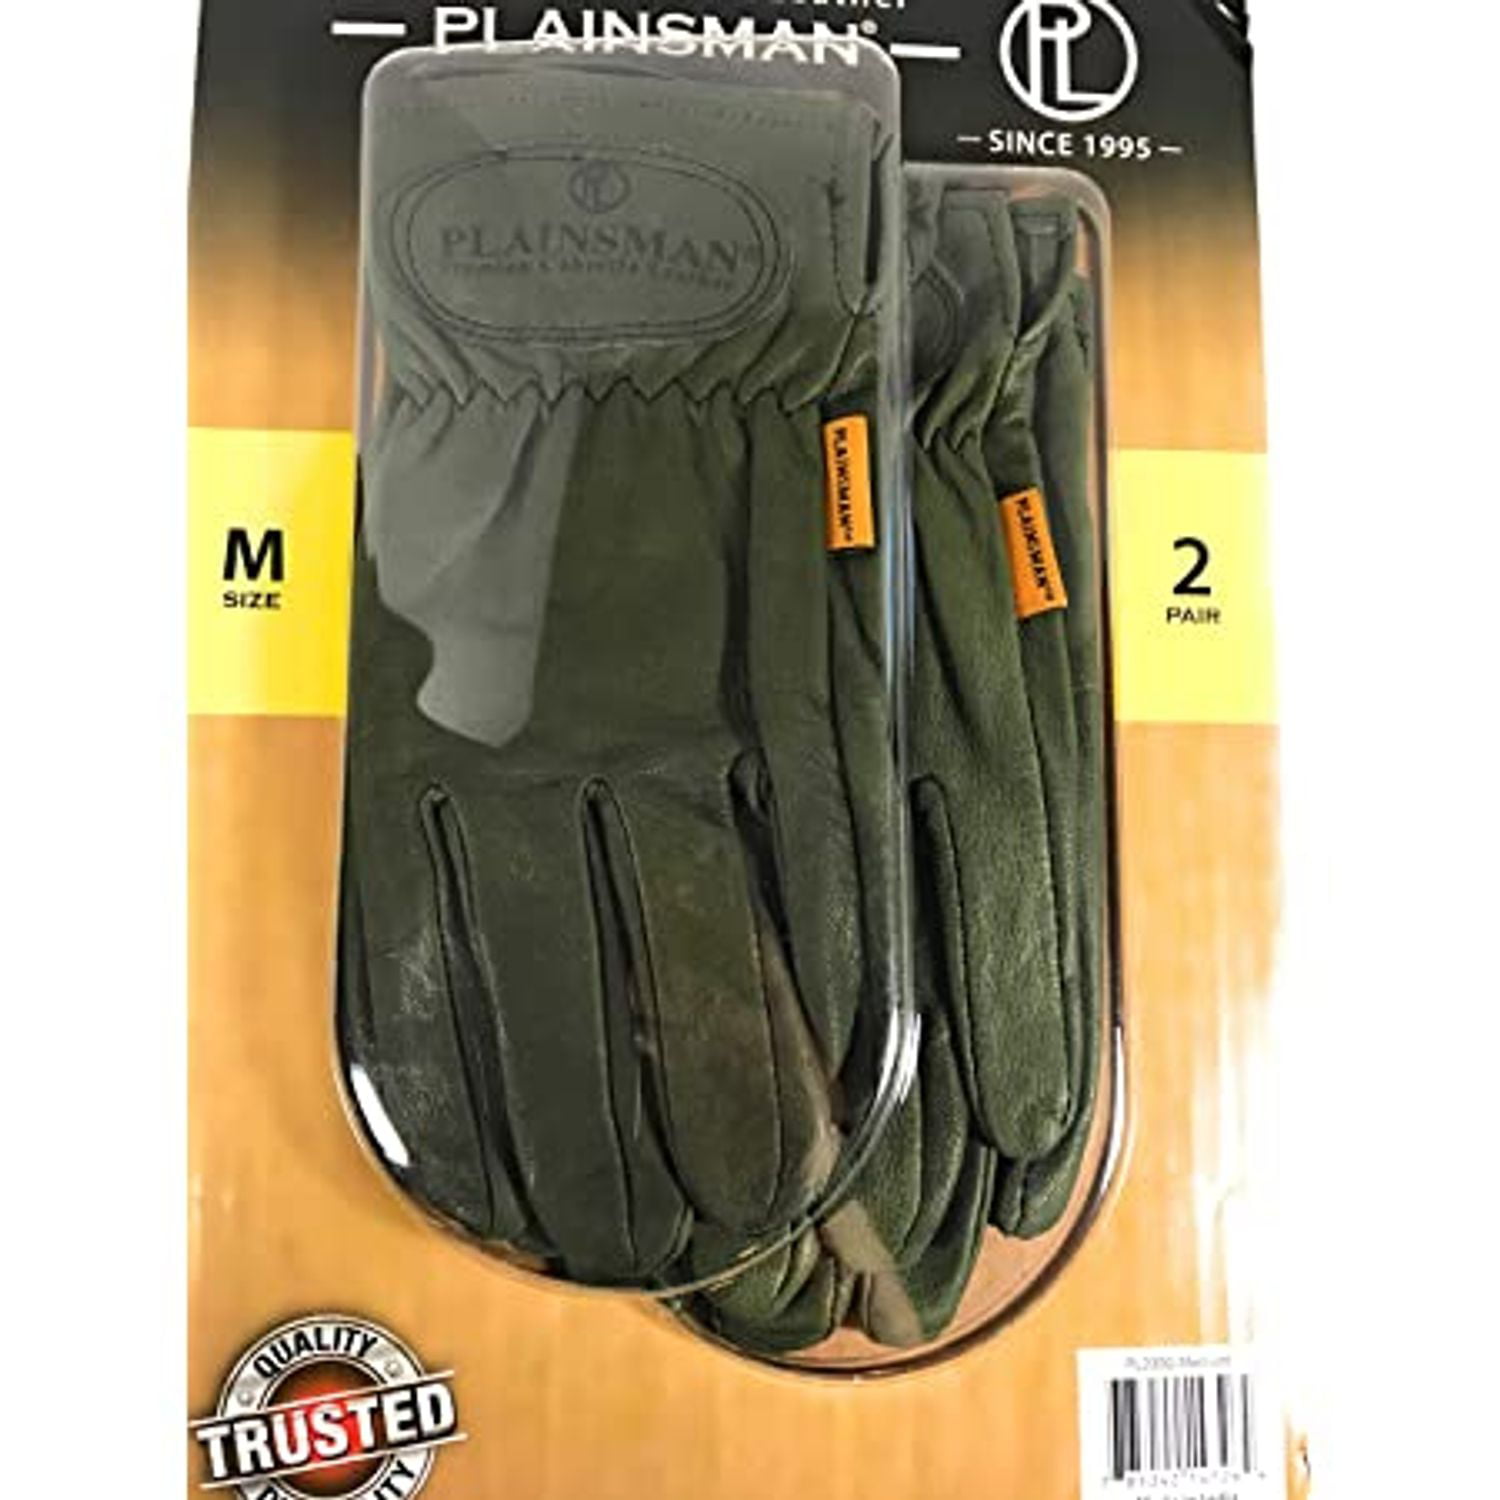 LARGE Work Gloves by Plainsman NEW Two Pairs Habit Premium Leather & Spandex EX 